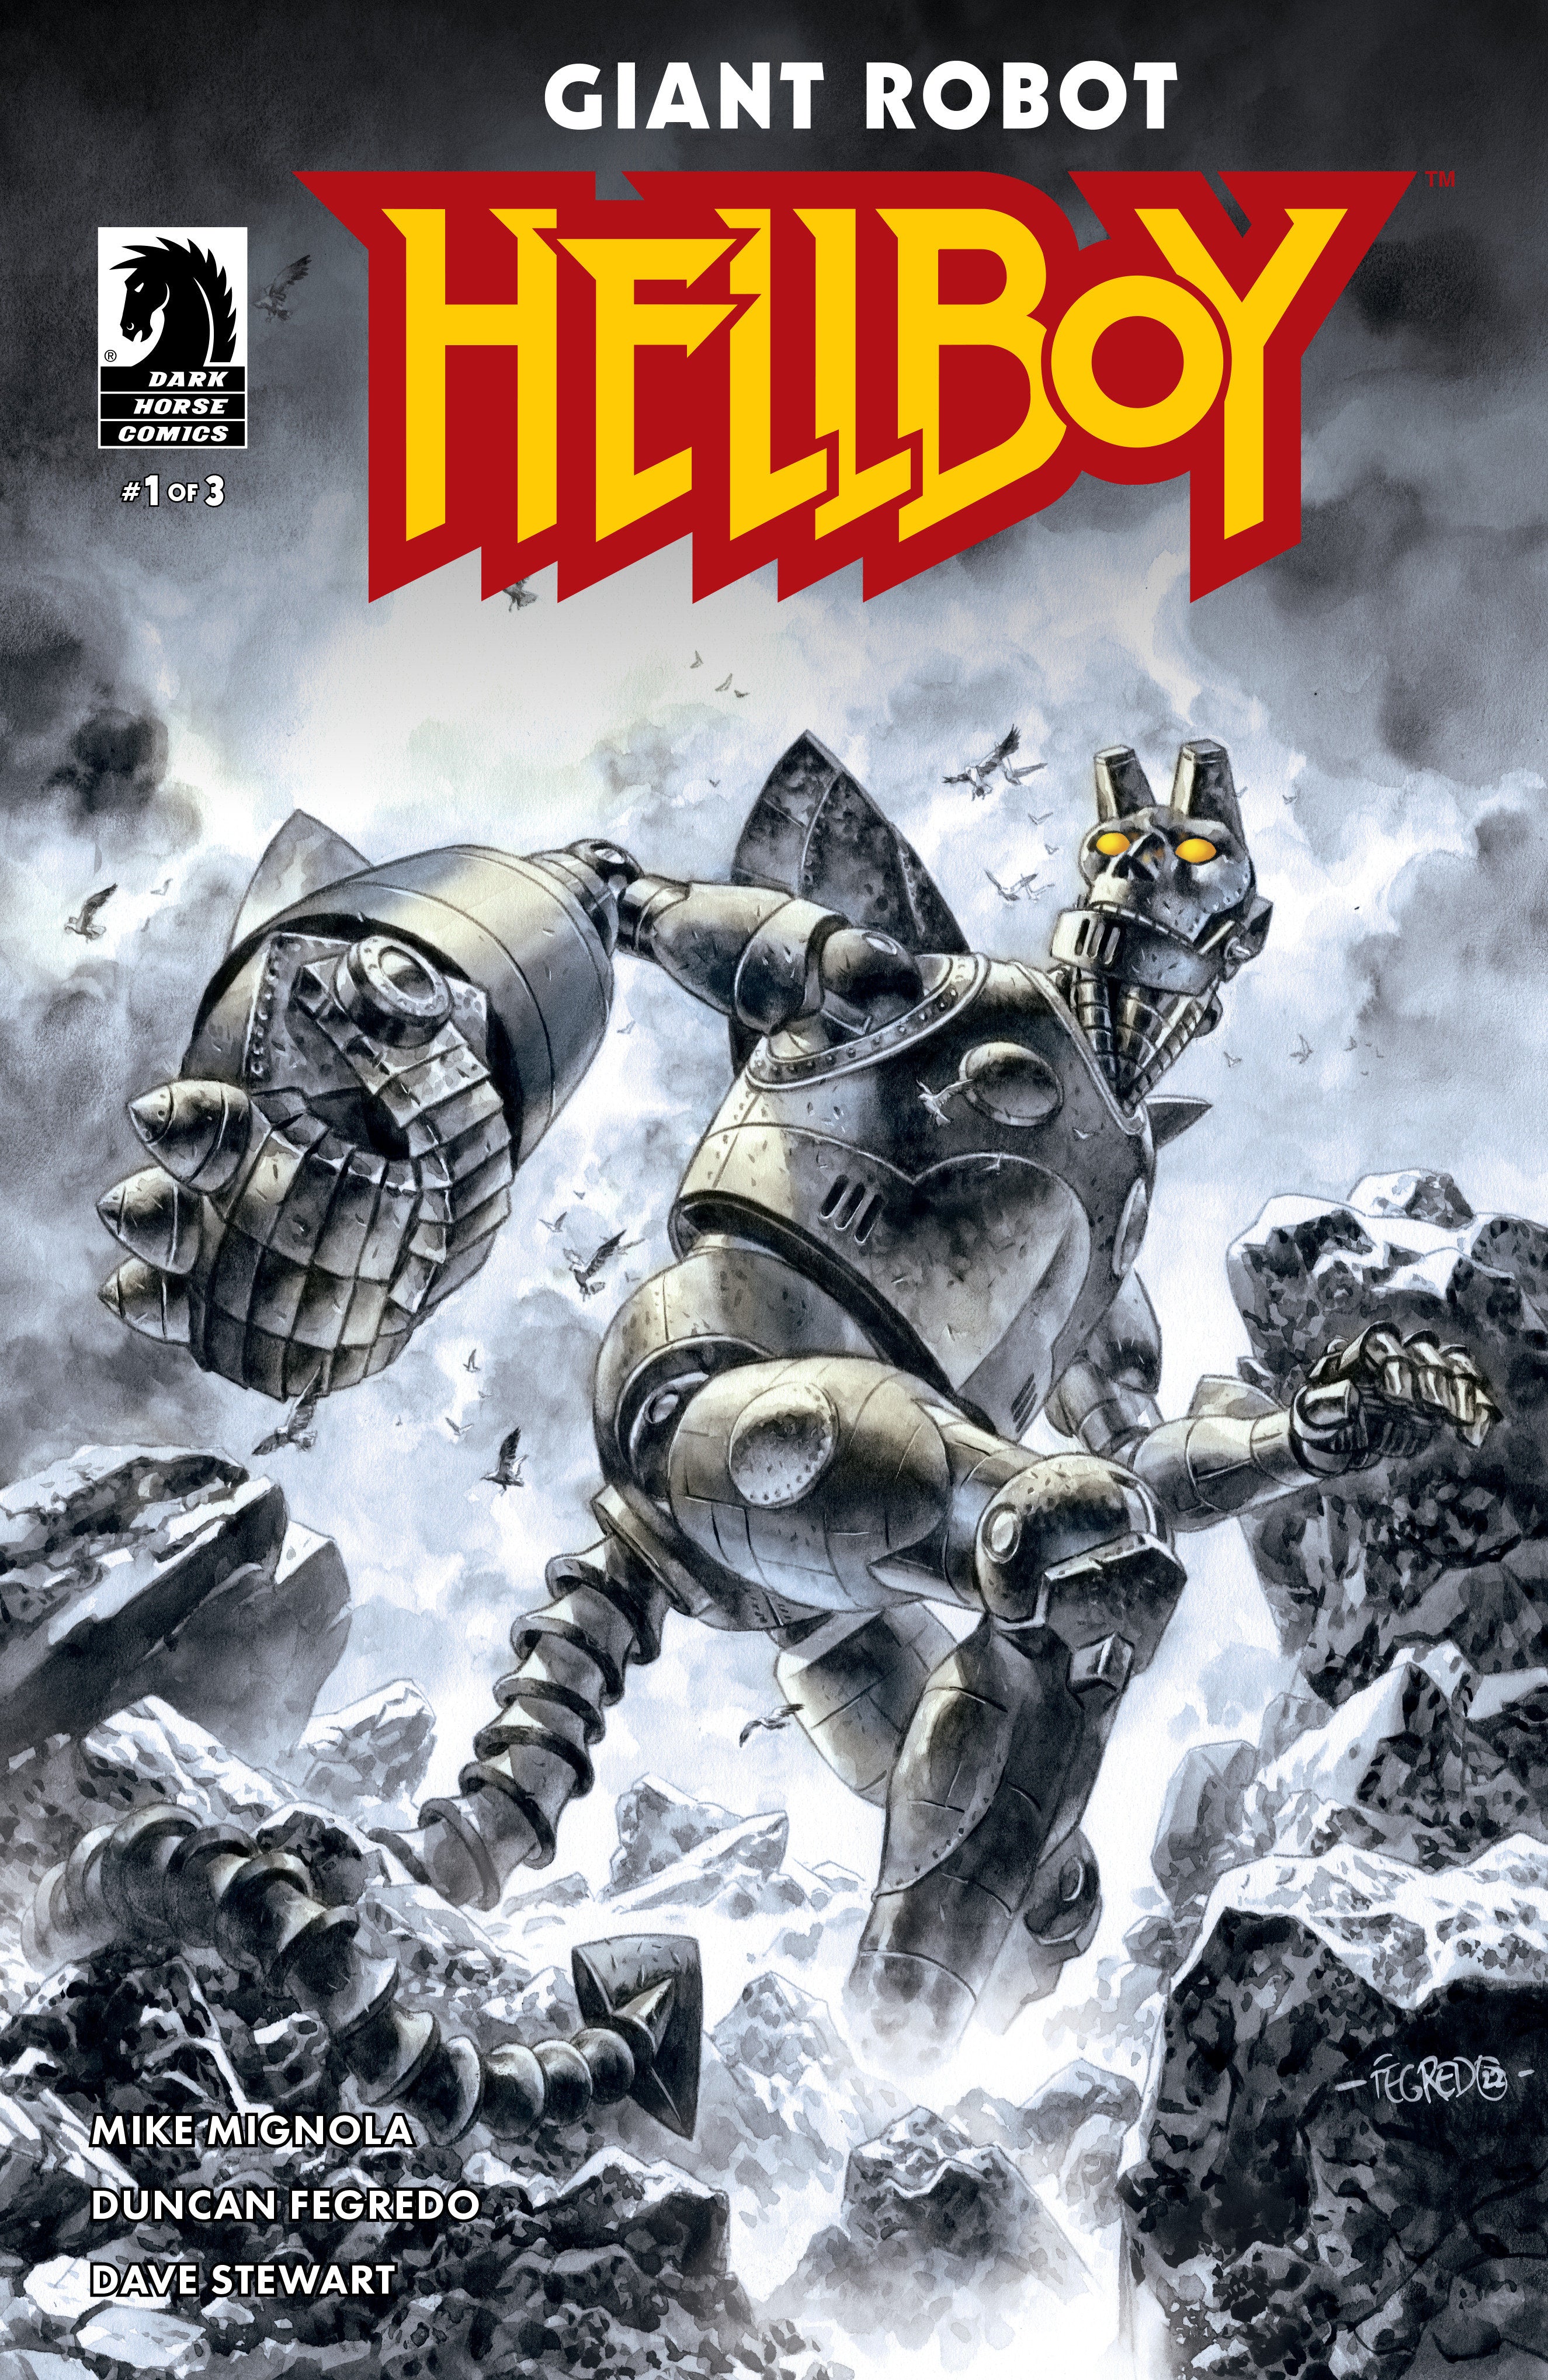 Giant Robot Hellboy #1 (Cover A) (Duncan Fegredo) | Game Master's Emporium (The New GME)